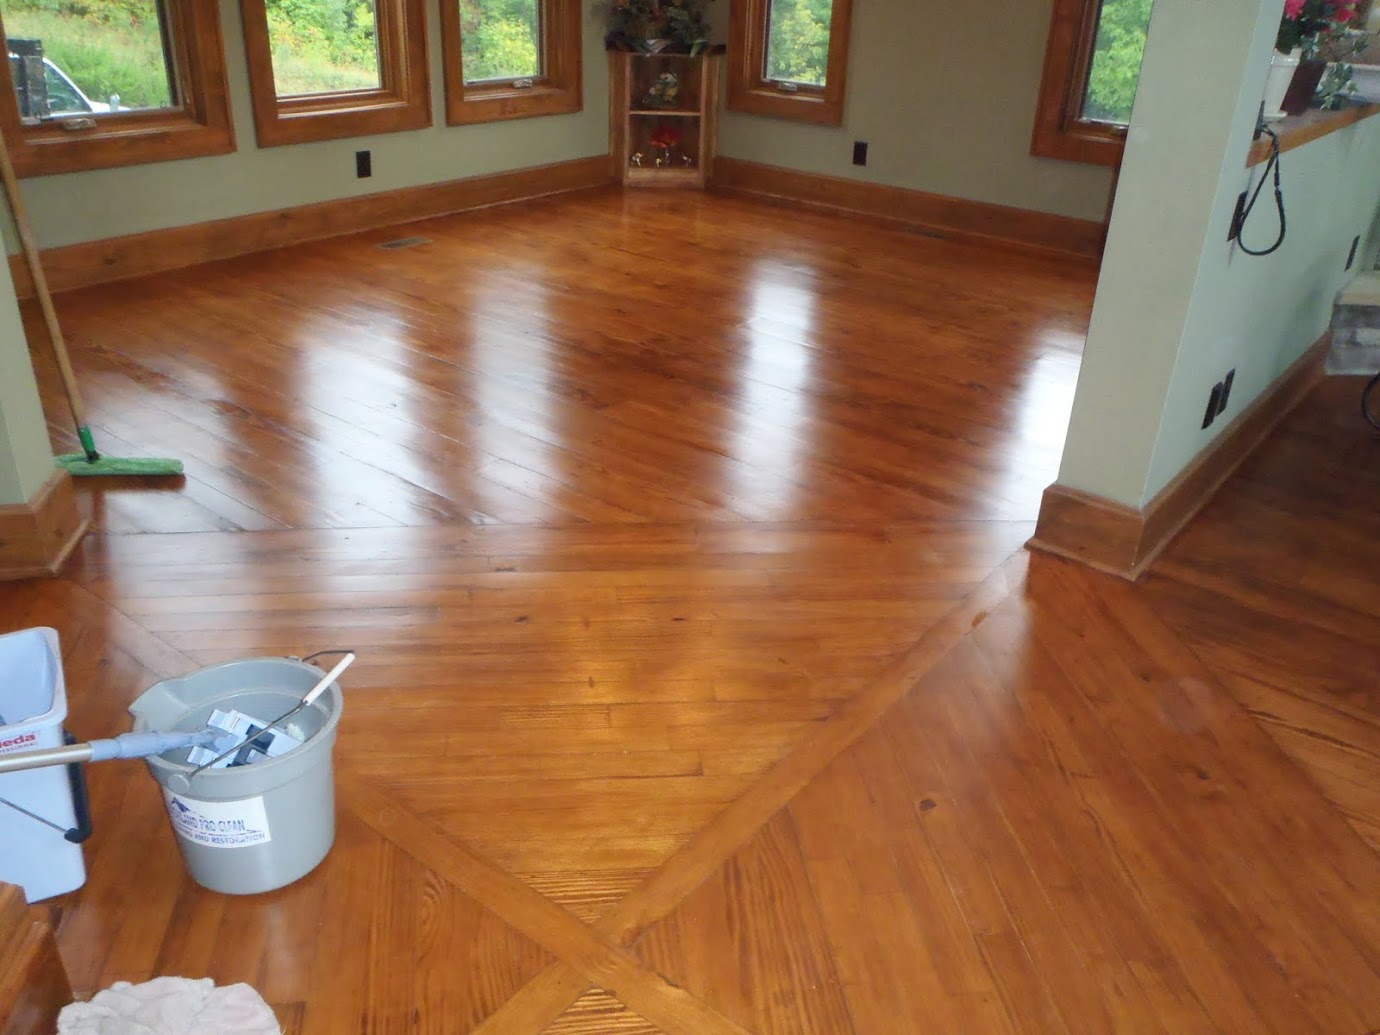 Wood Floor Cleaning Service and cost in McAllen | RGV Cleaning Company